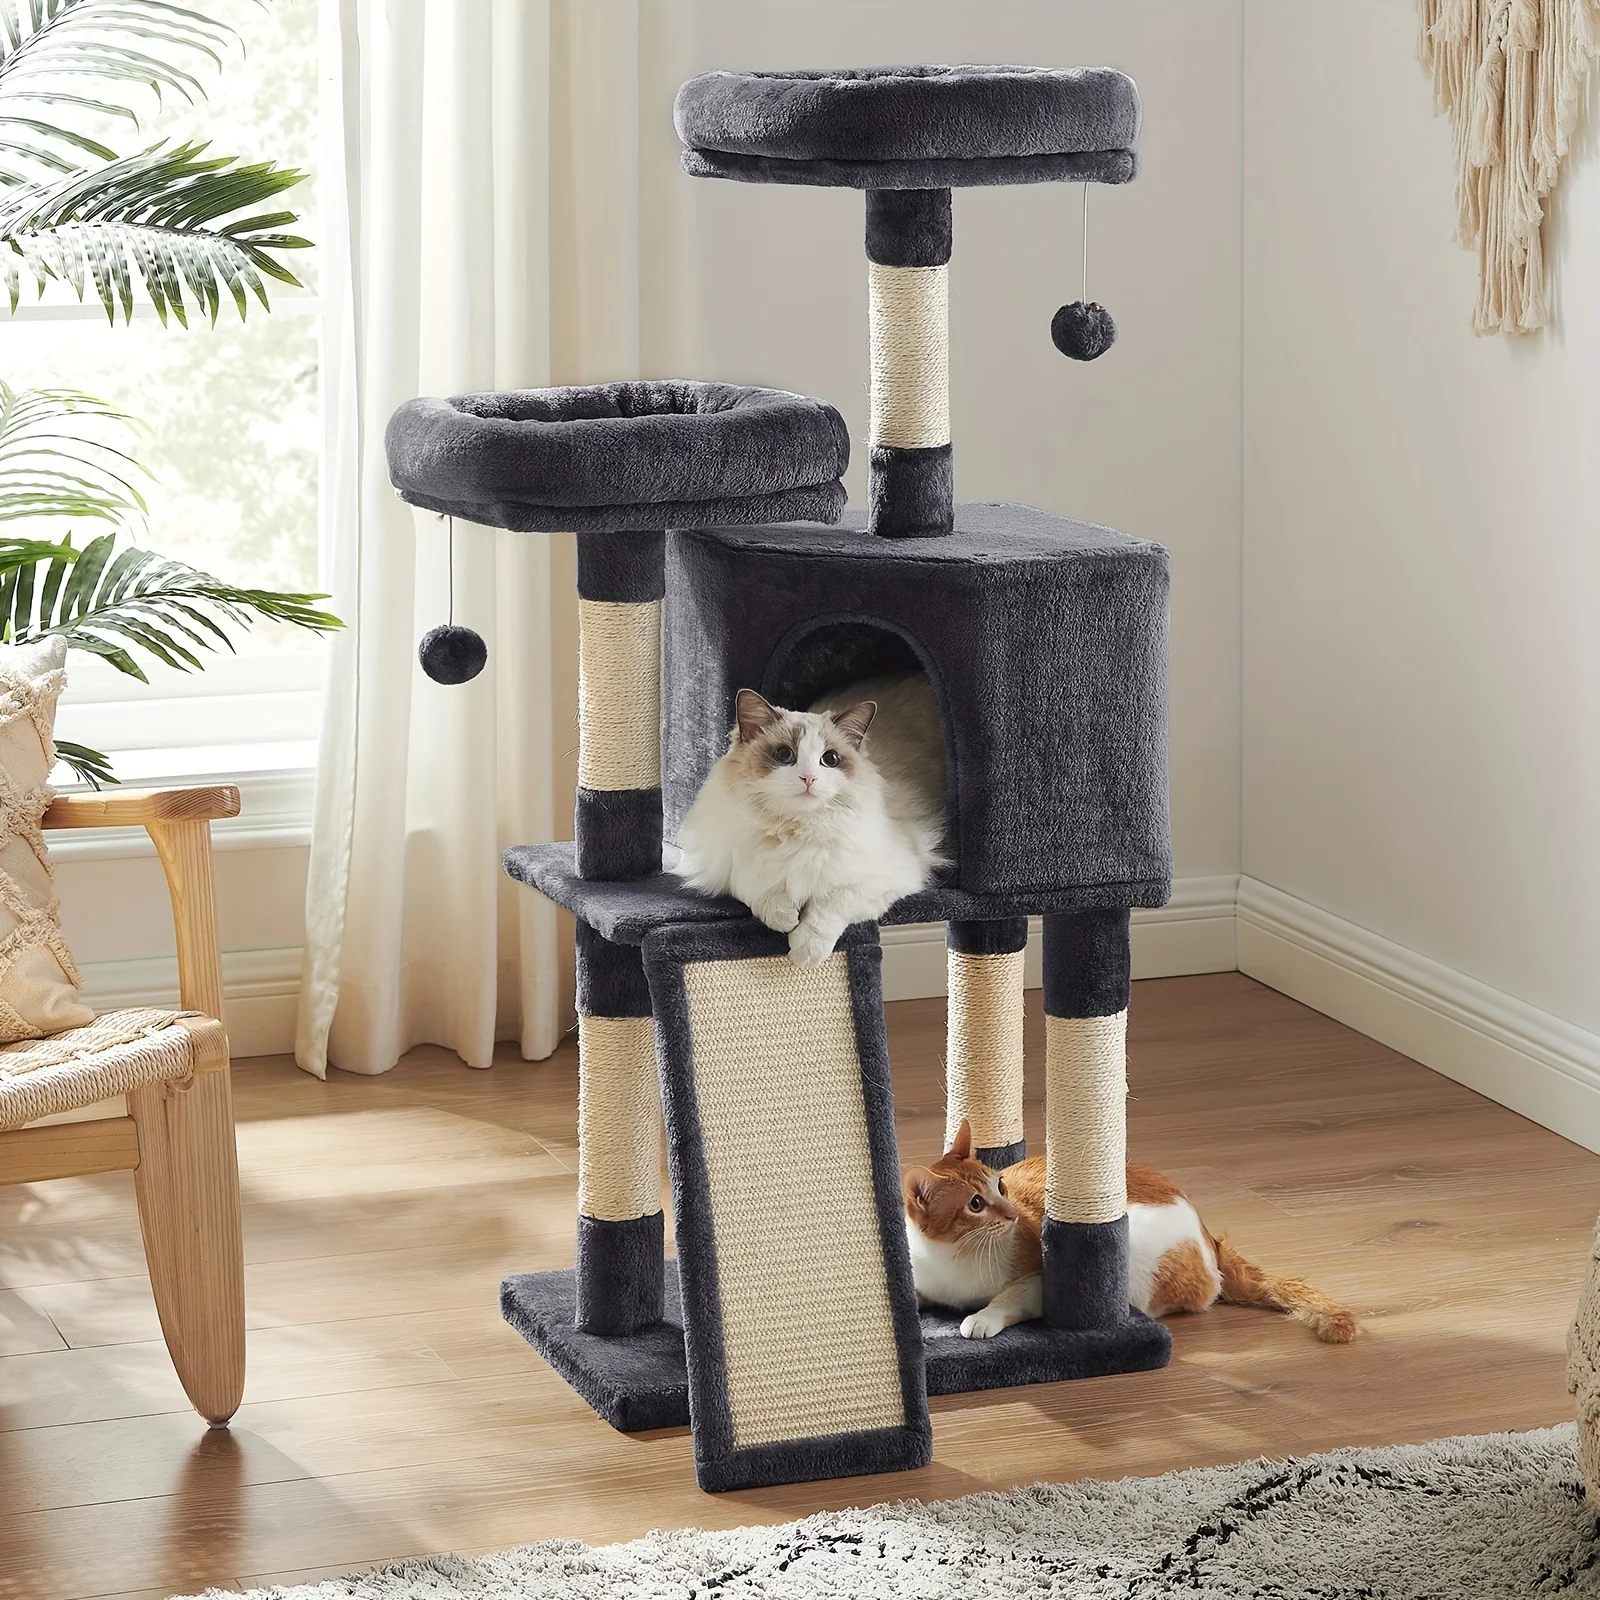 

Cat Tower, Cat Tree For Indoor Cats, 45.3-Inch Cat Condo With Scratching Post, Ramp, Perch, Spacious Cat Cave, For Kittens, Elde